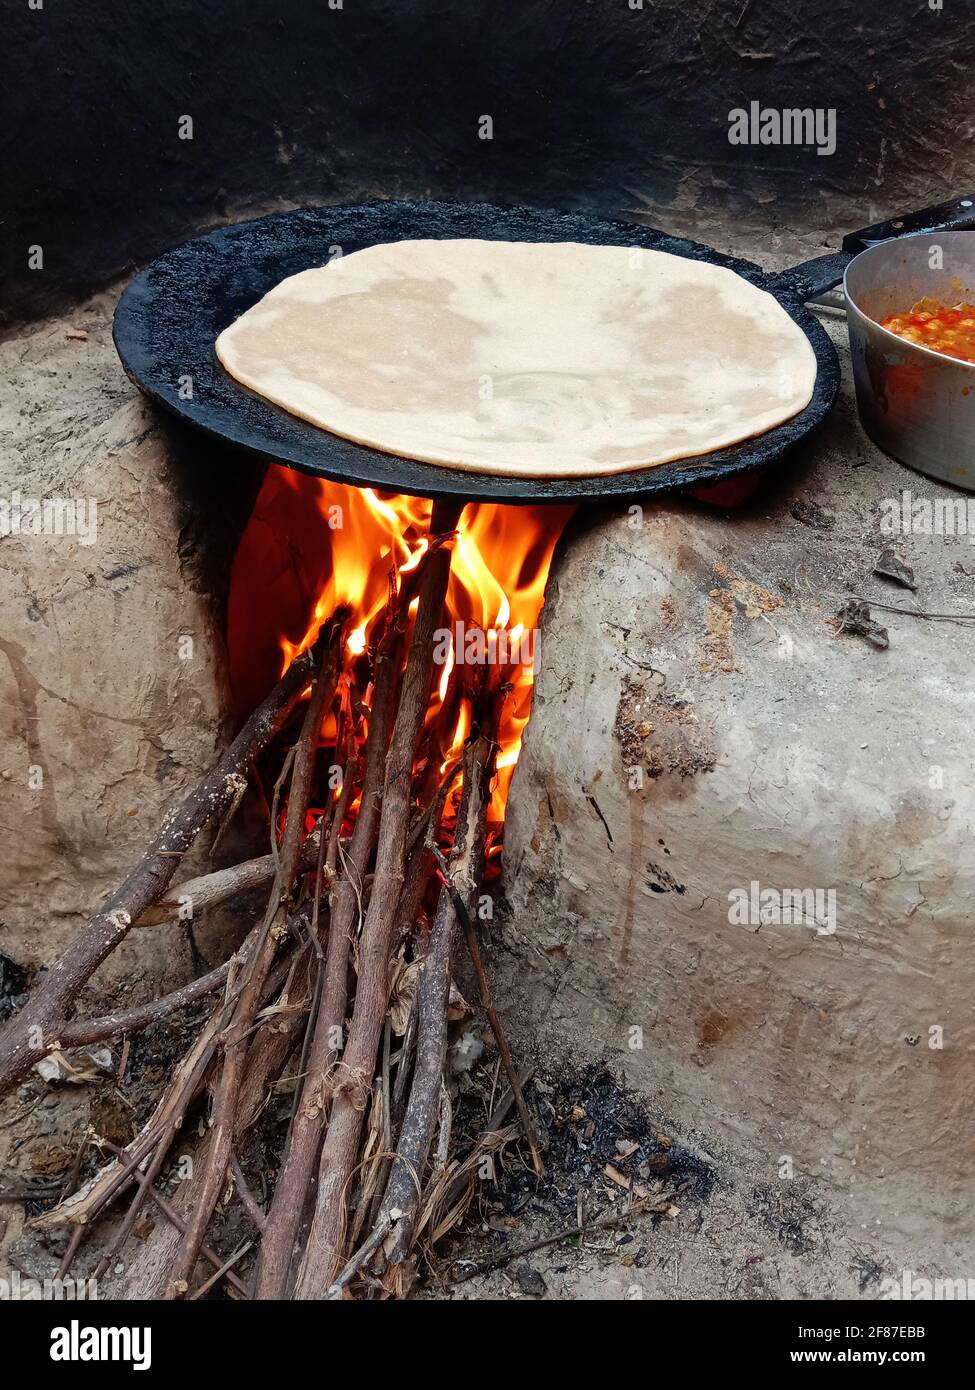 https://c8.alamy.com/comp/2F87EBB/wooden-fire-burning-in-hand-made-mud-stove-with-bread-roti-is-being-baked-on-desi-tawa-village-2F87EBB.jpg